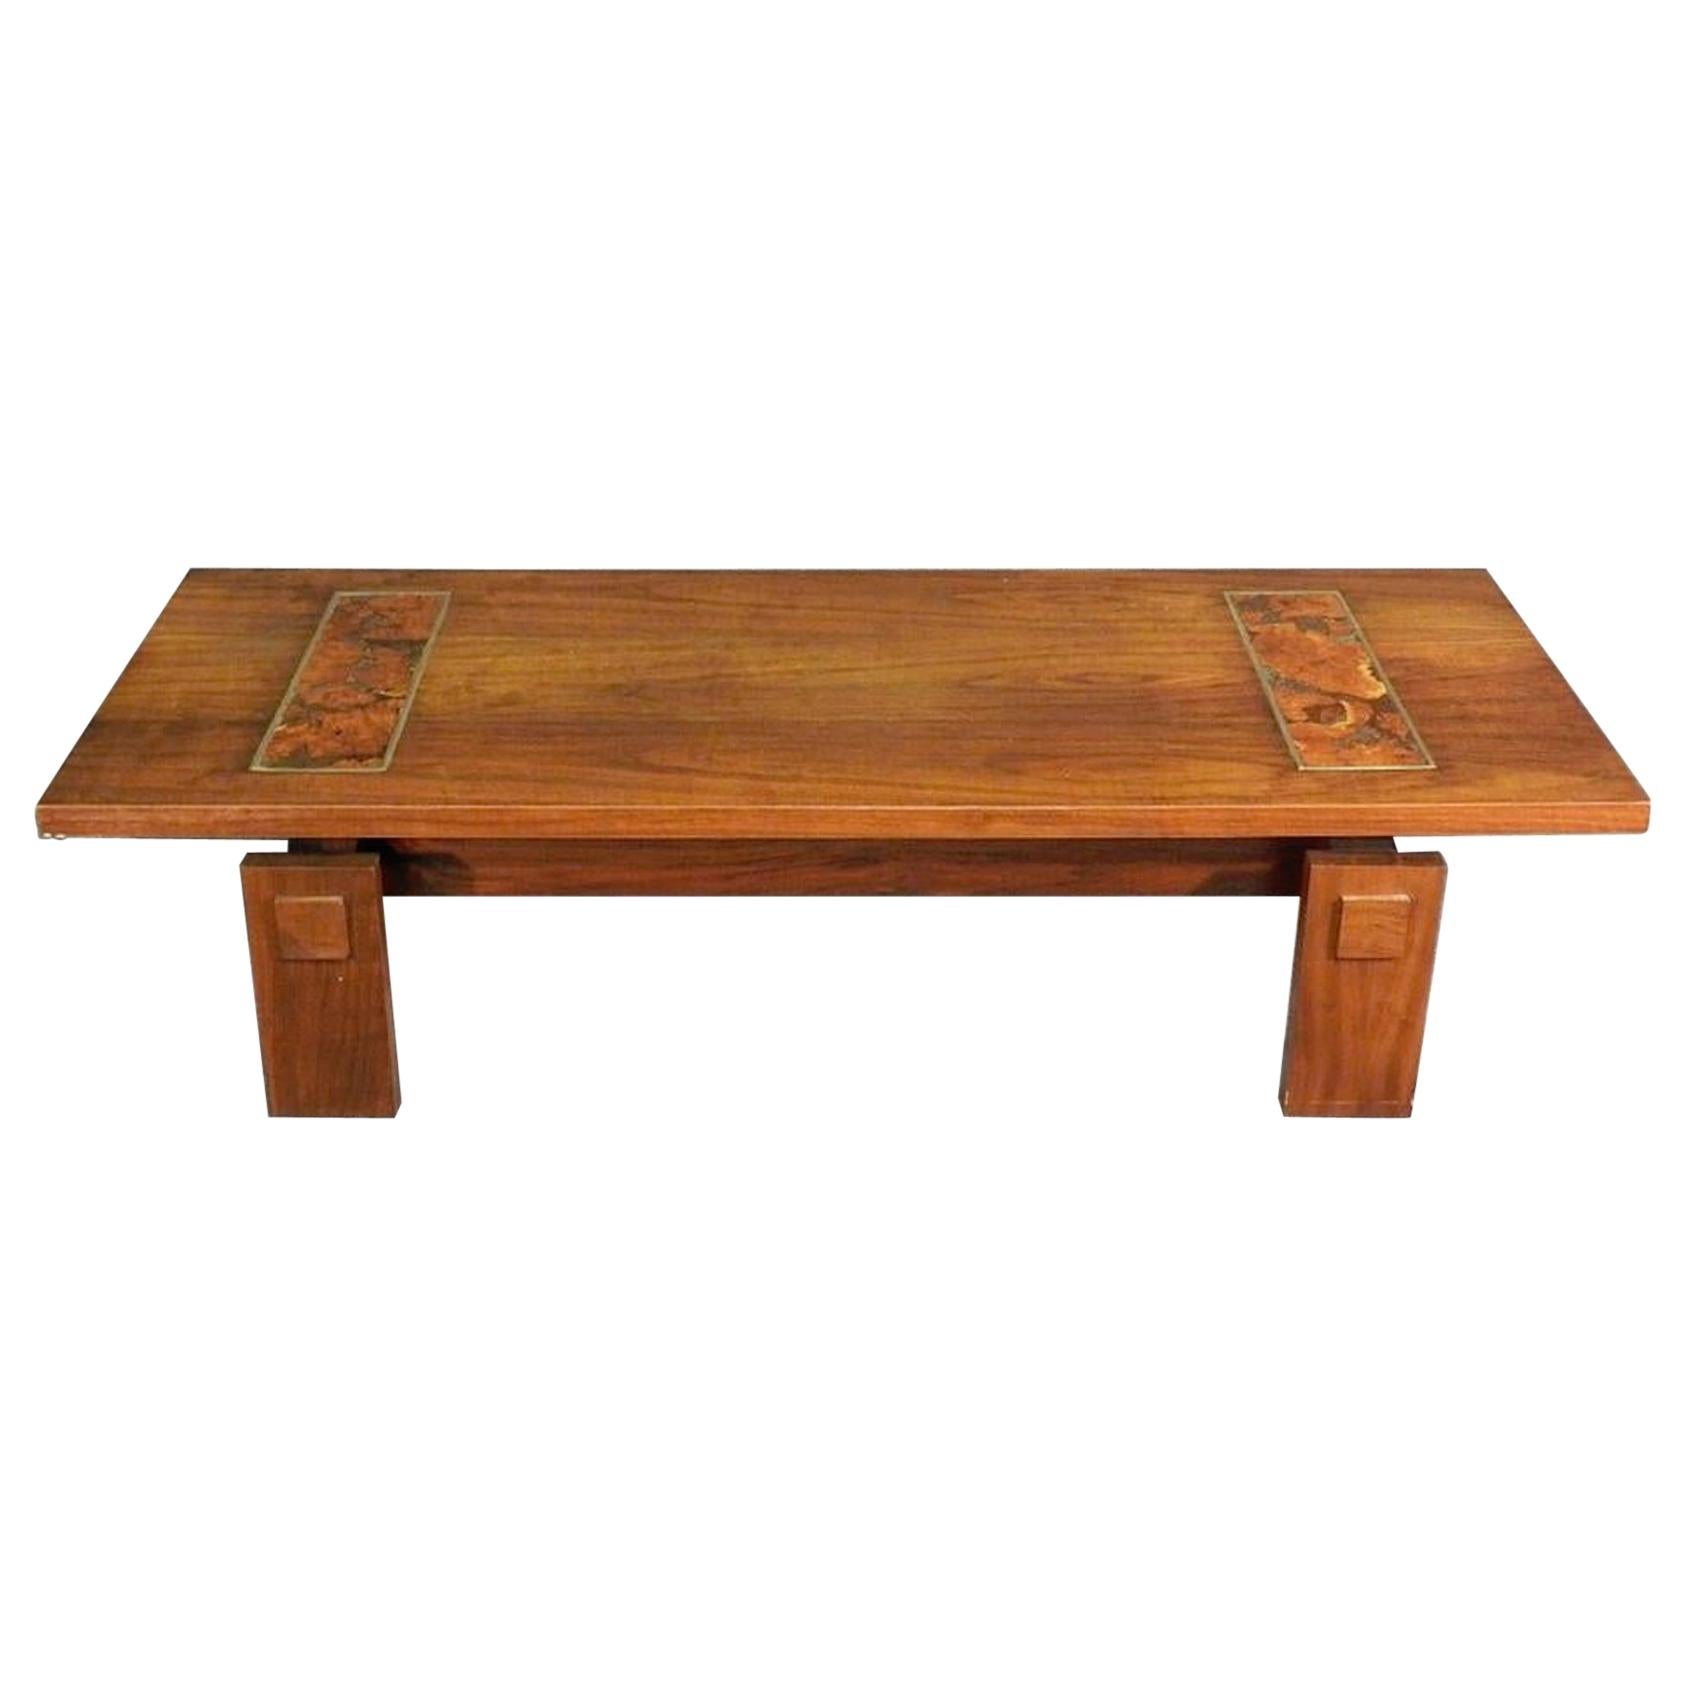 Beautiful Midcentury Table with Inlay